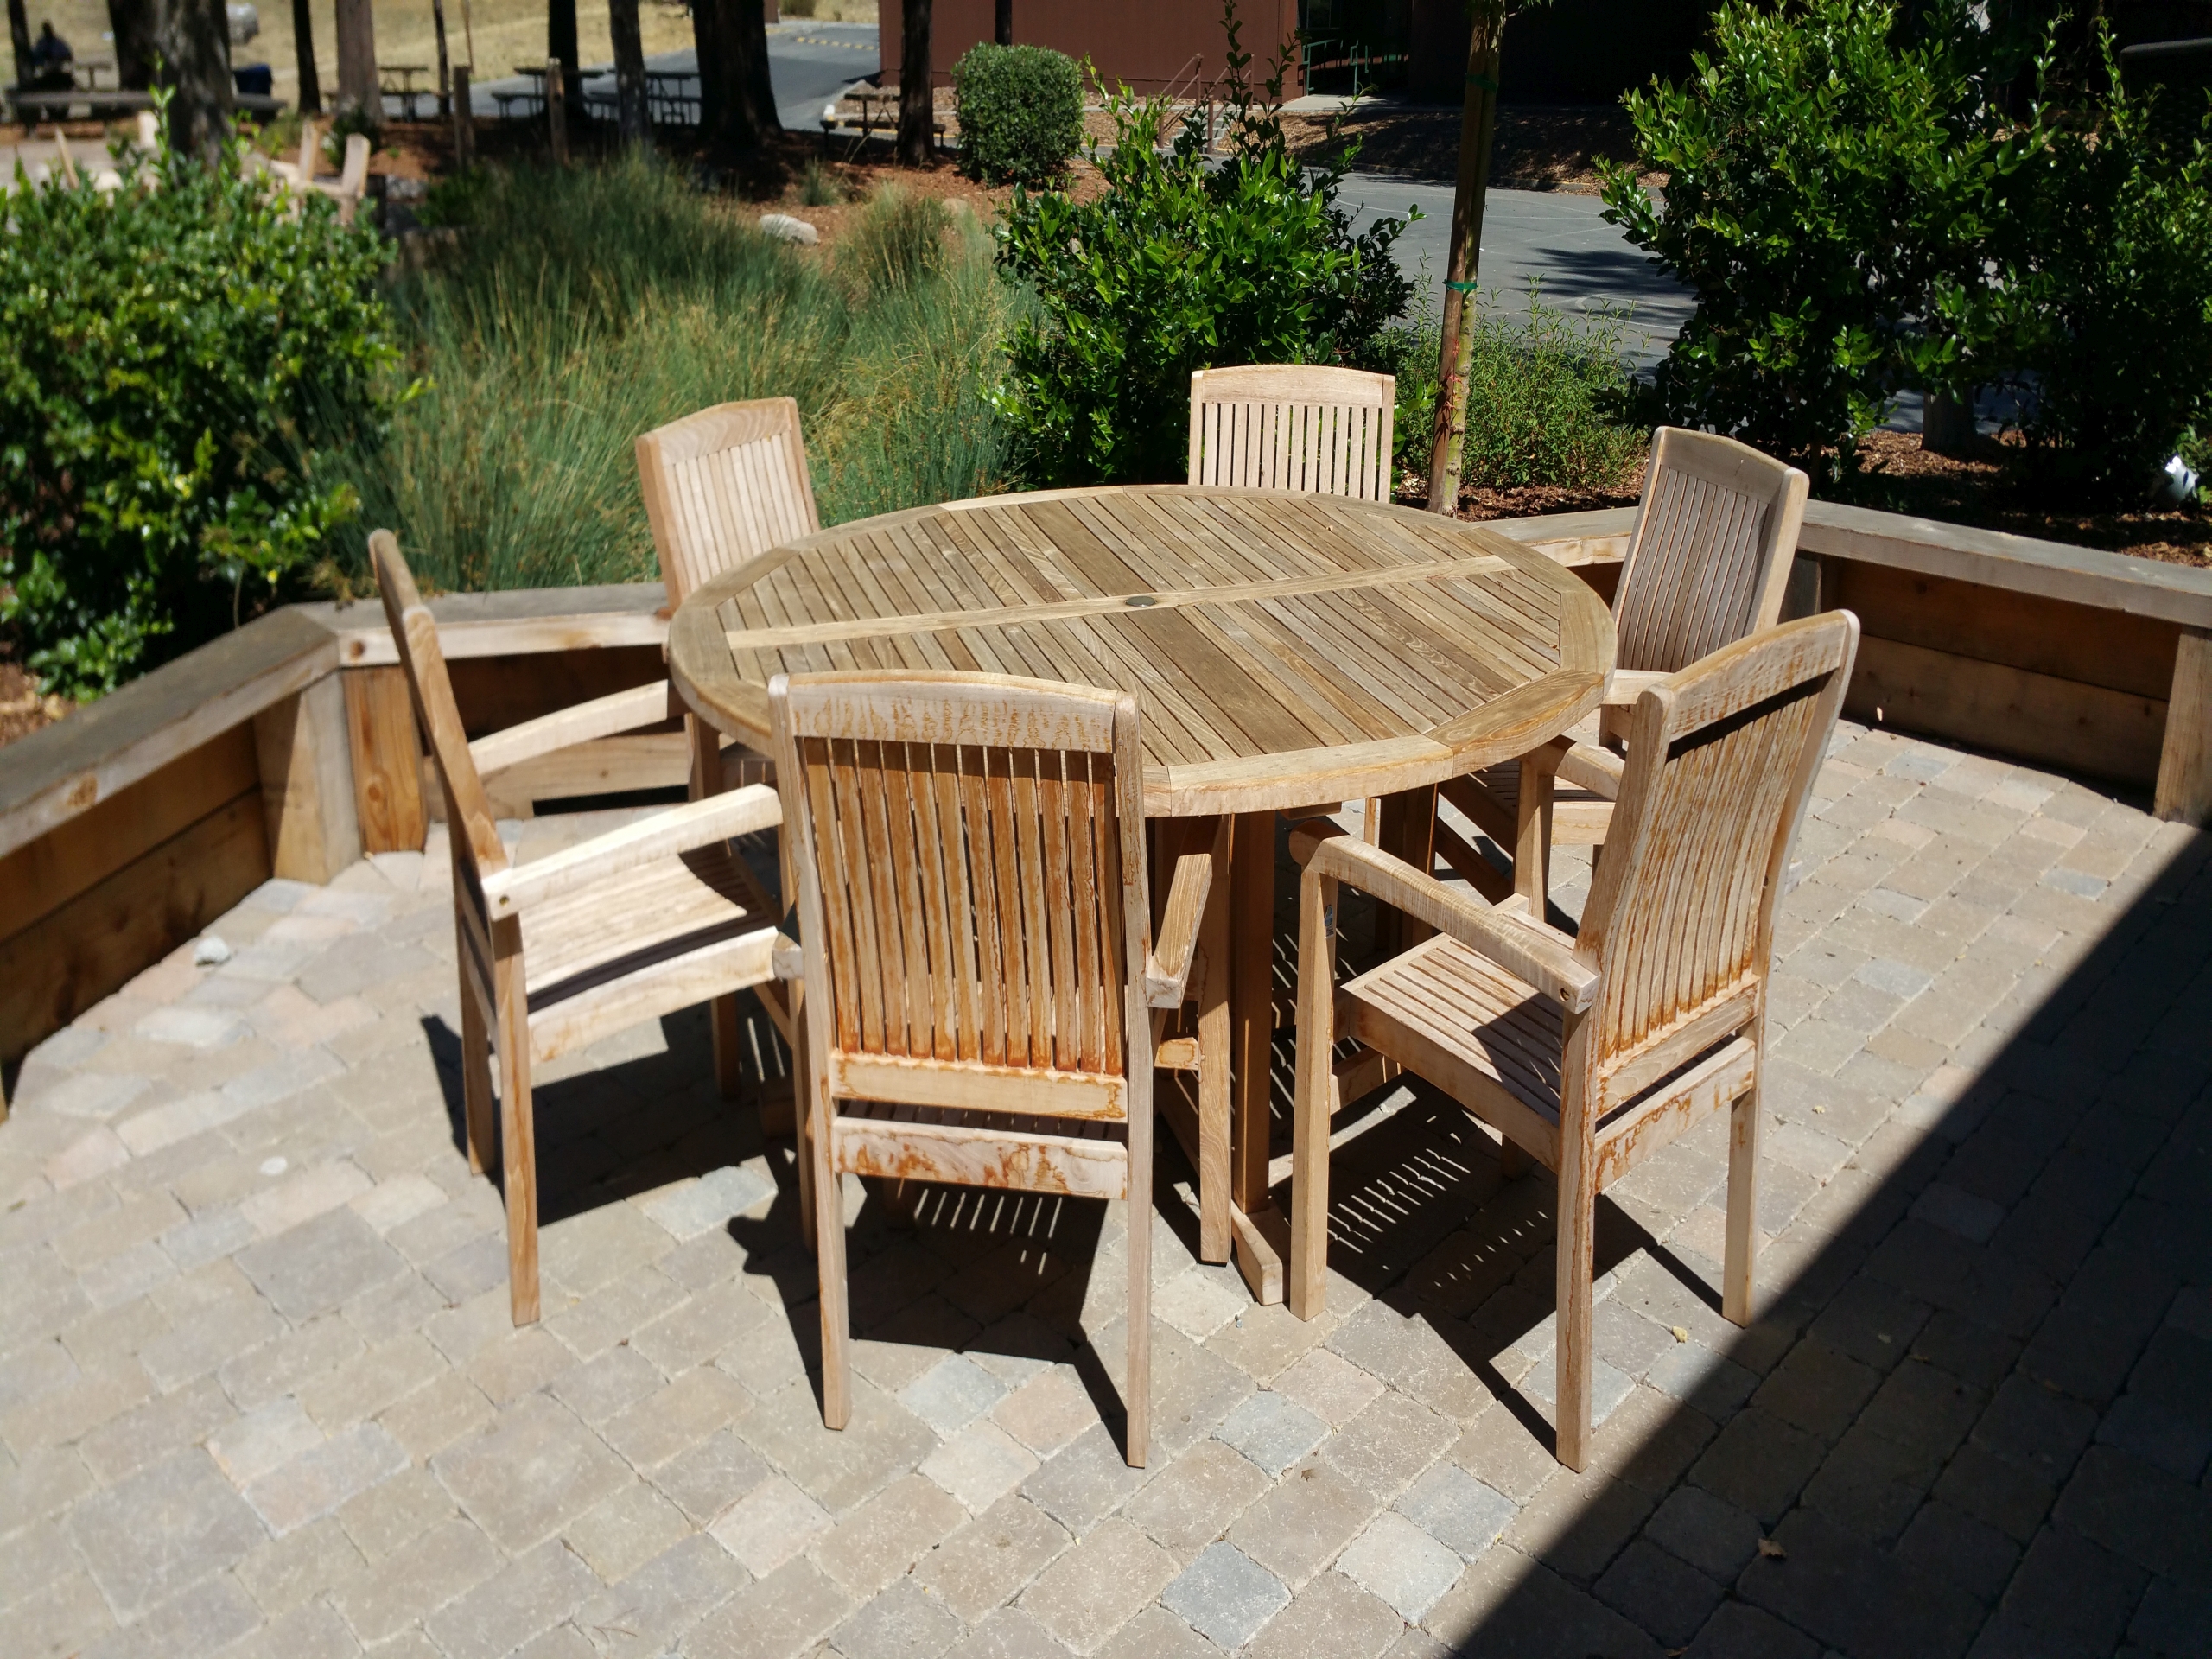 Minimalist Rustic Or Chic: Teak Patio Furniture Styles For Every Preference